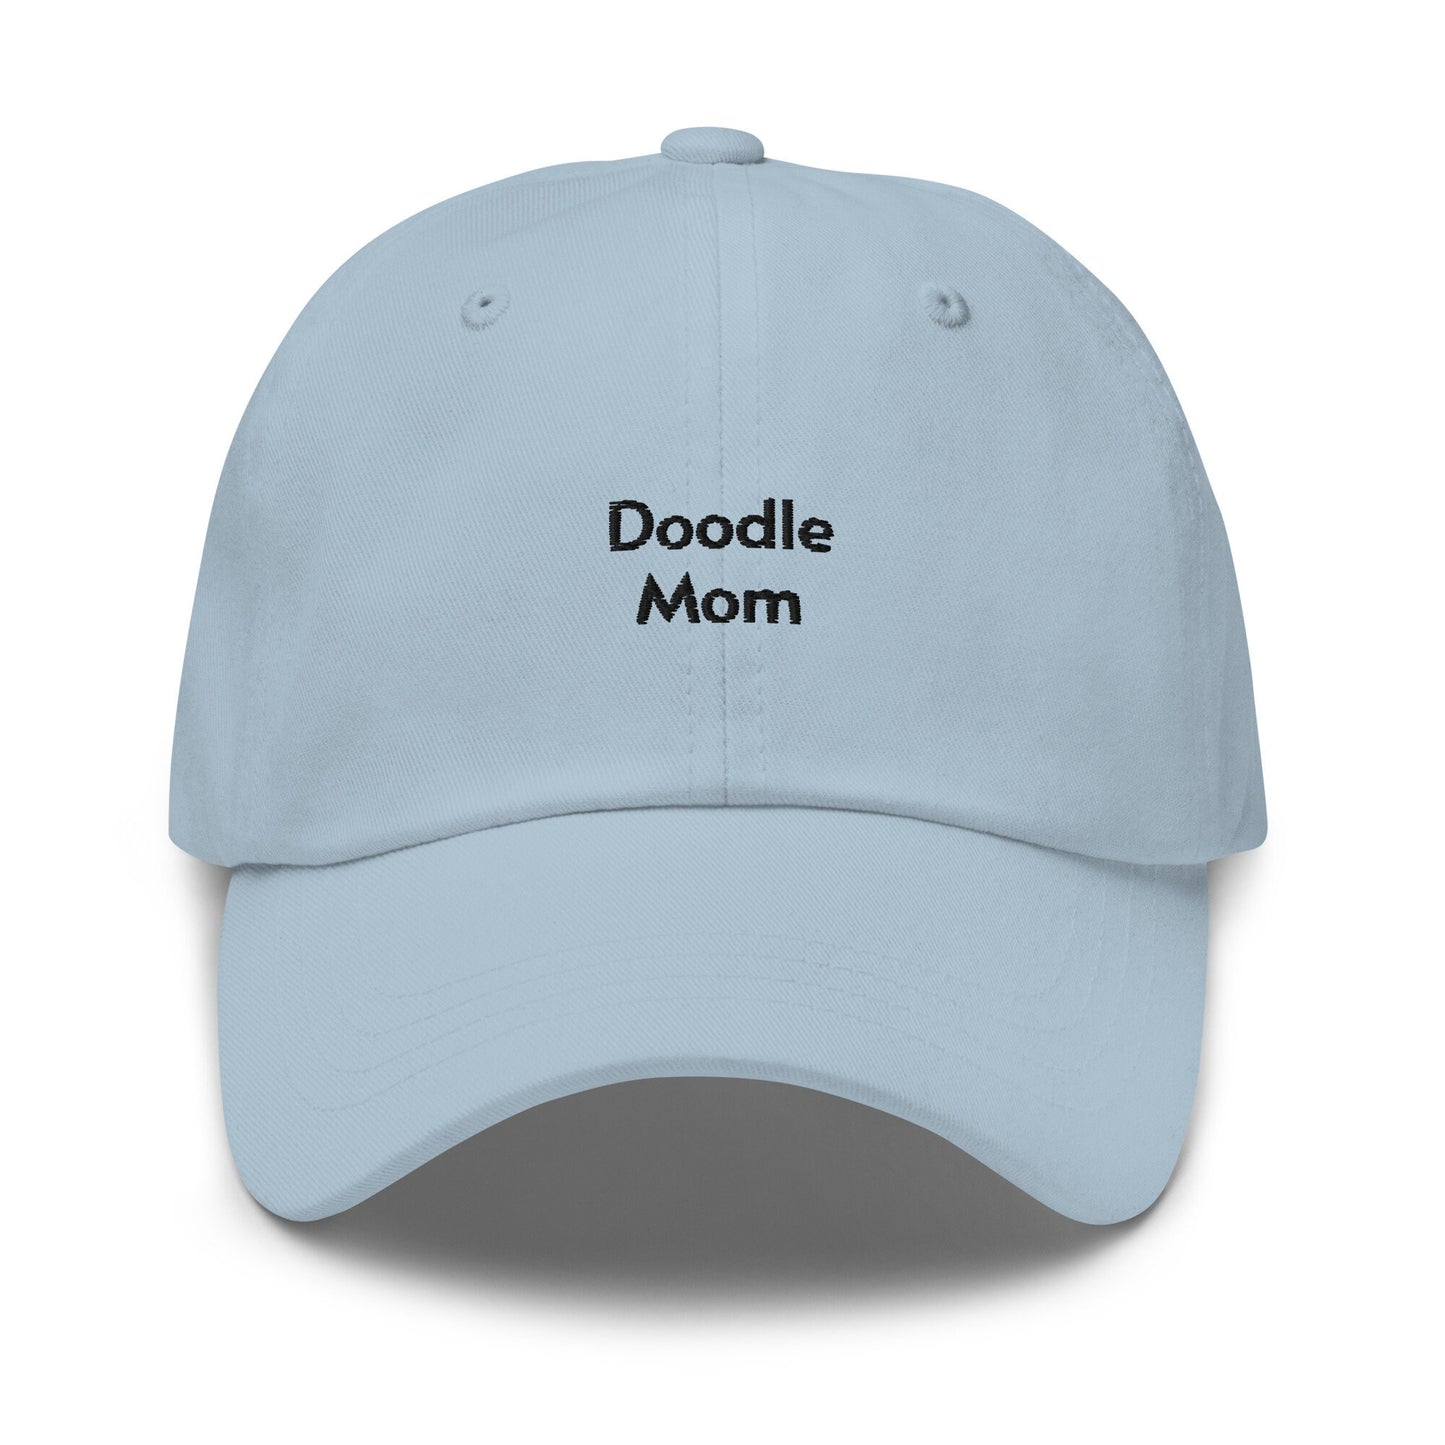 Doodle Mom Embroidered Hat